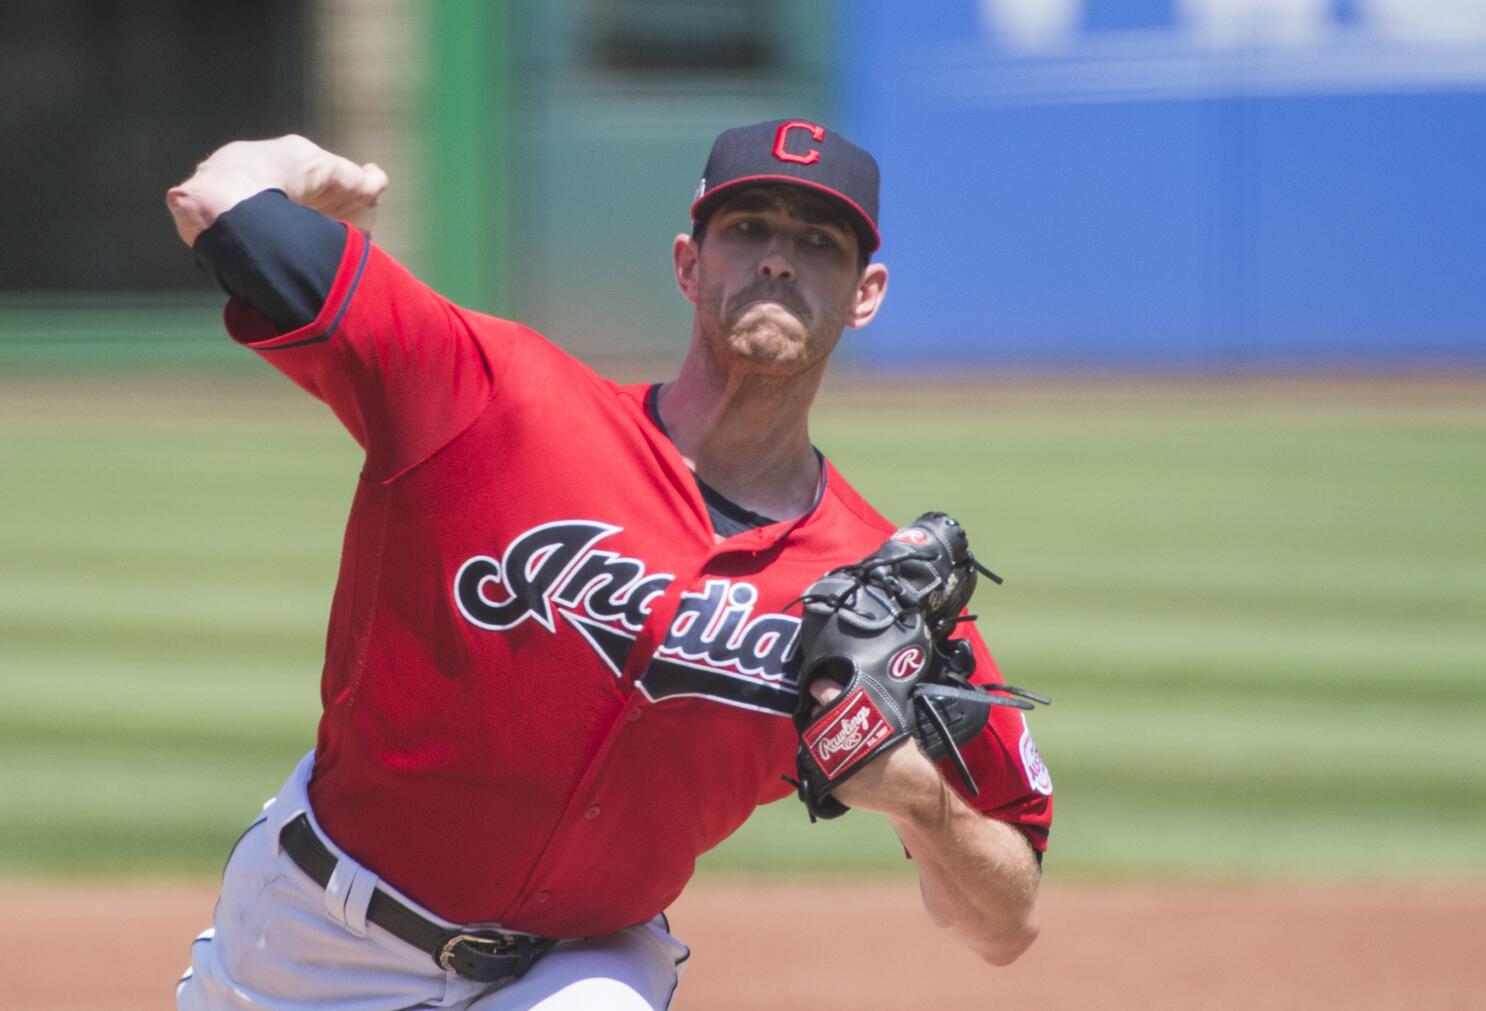 Shane Bieber, No Relation to Justin, Is Quickly Making a Name for Himself